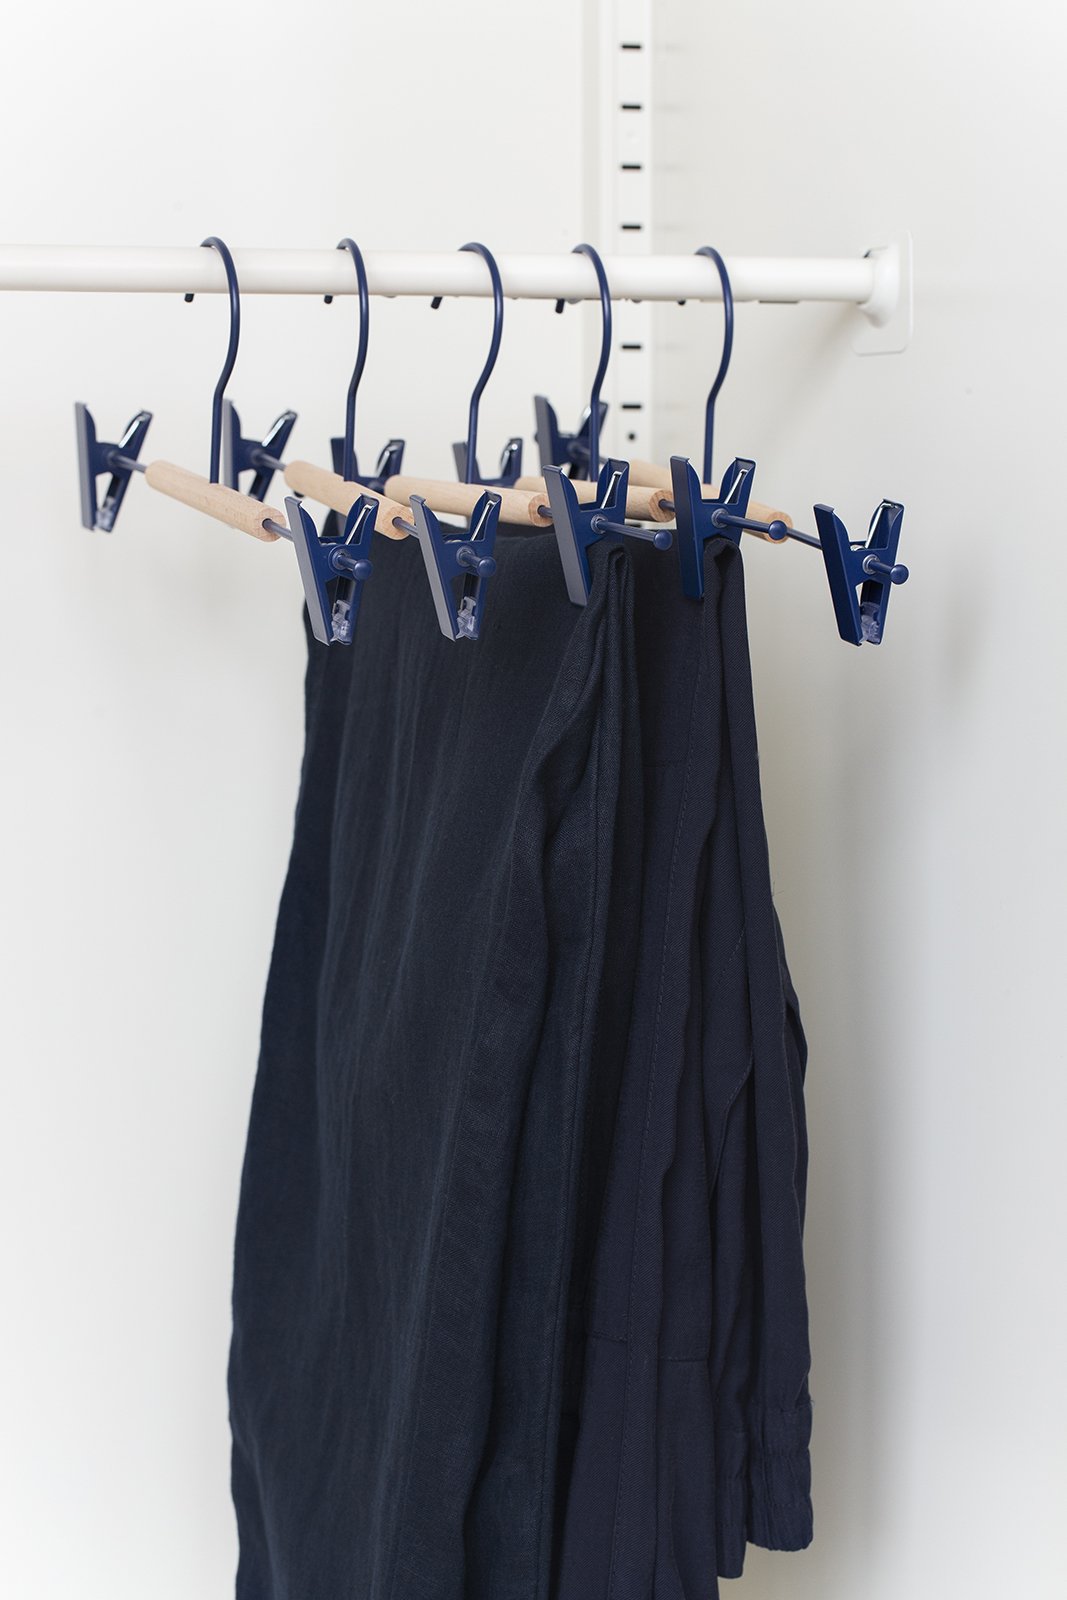 Mustard Made Adult Clip Hangers in Navy Pack of 5